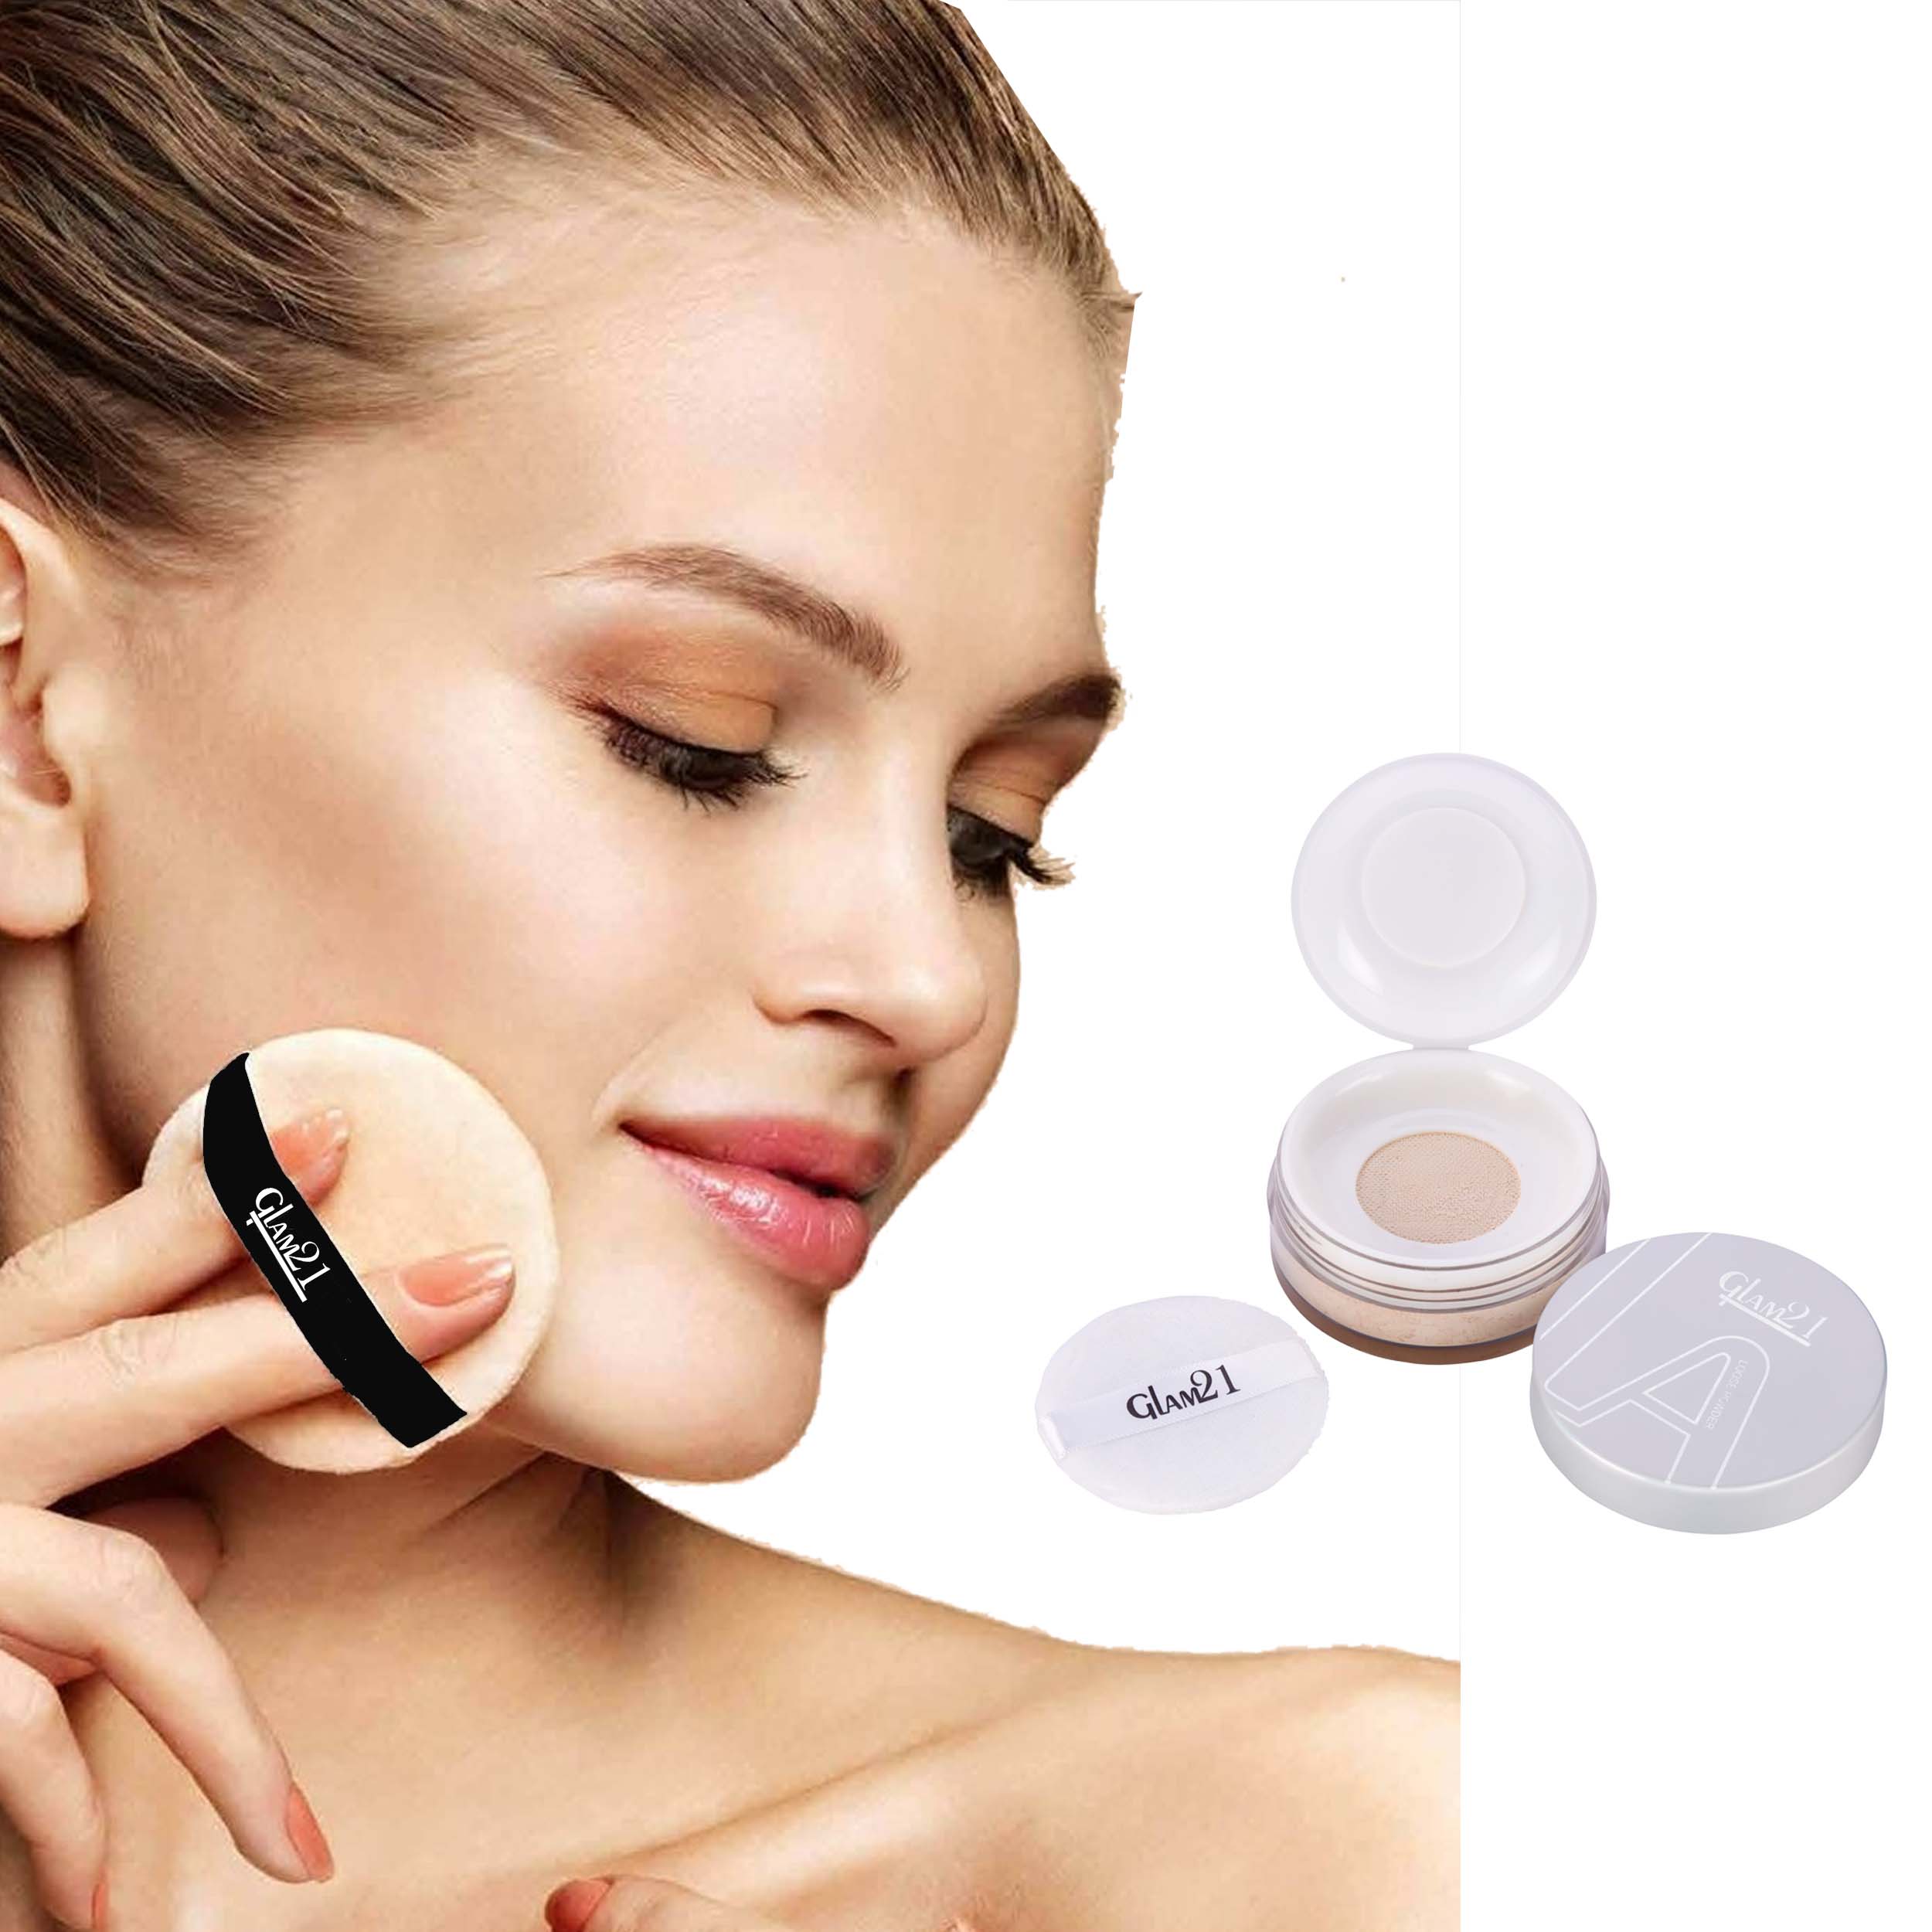 Glam21 Loose Face Powder Compact, 8 g Absorb Excess Oil & Sweat | Give the Best Sheer Finish Compact, 8 g (Light)